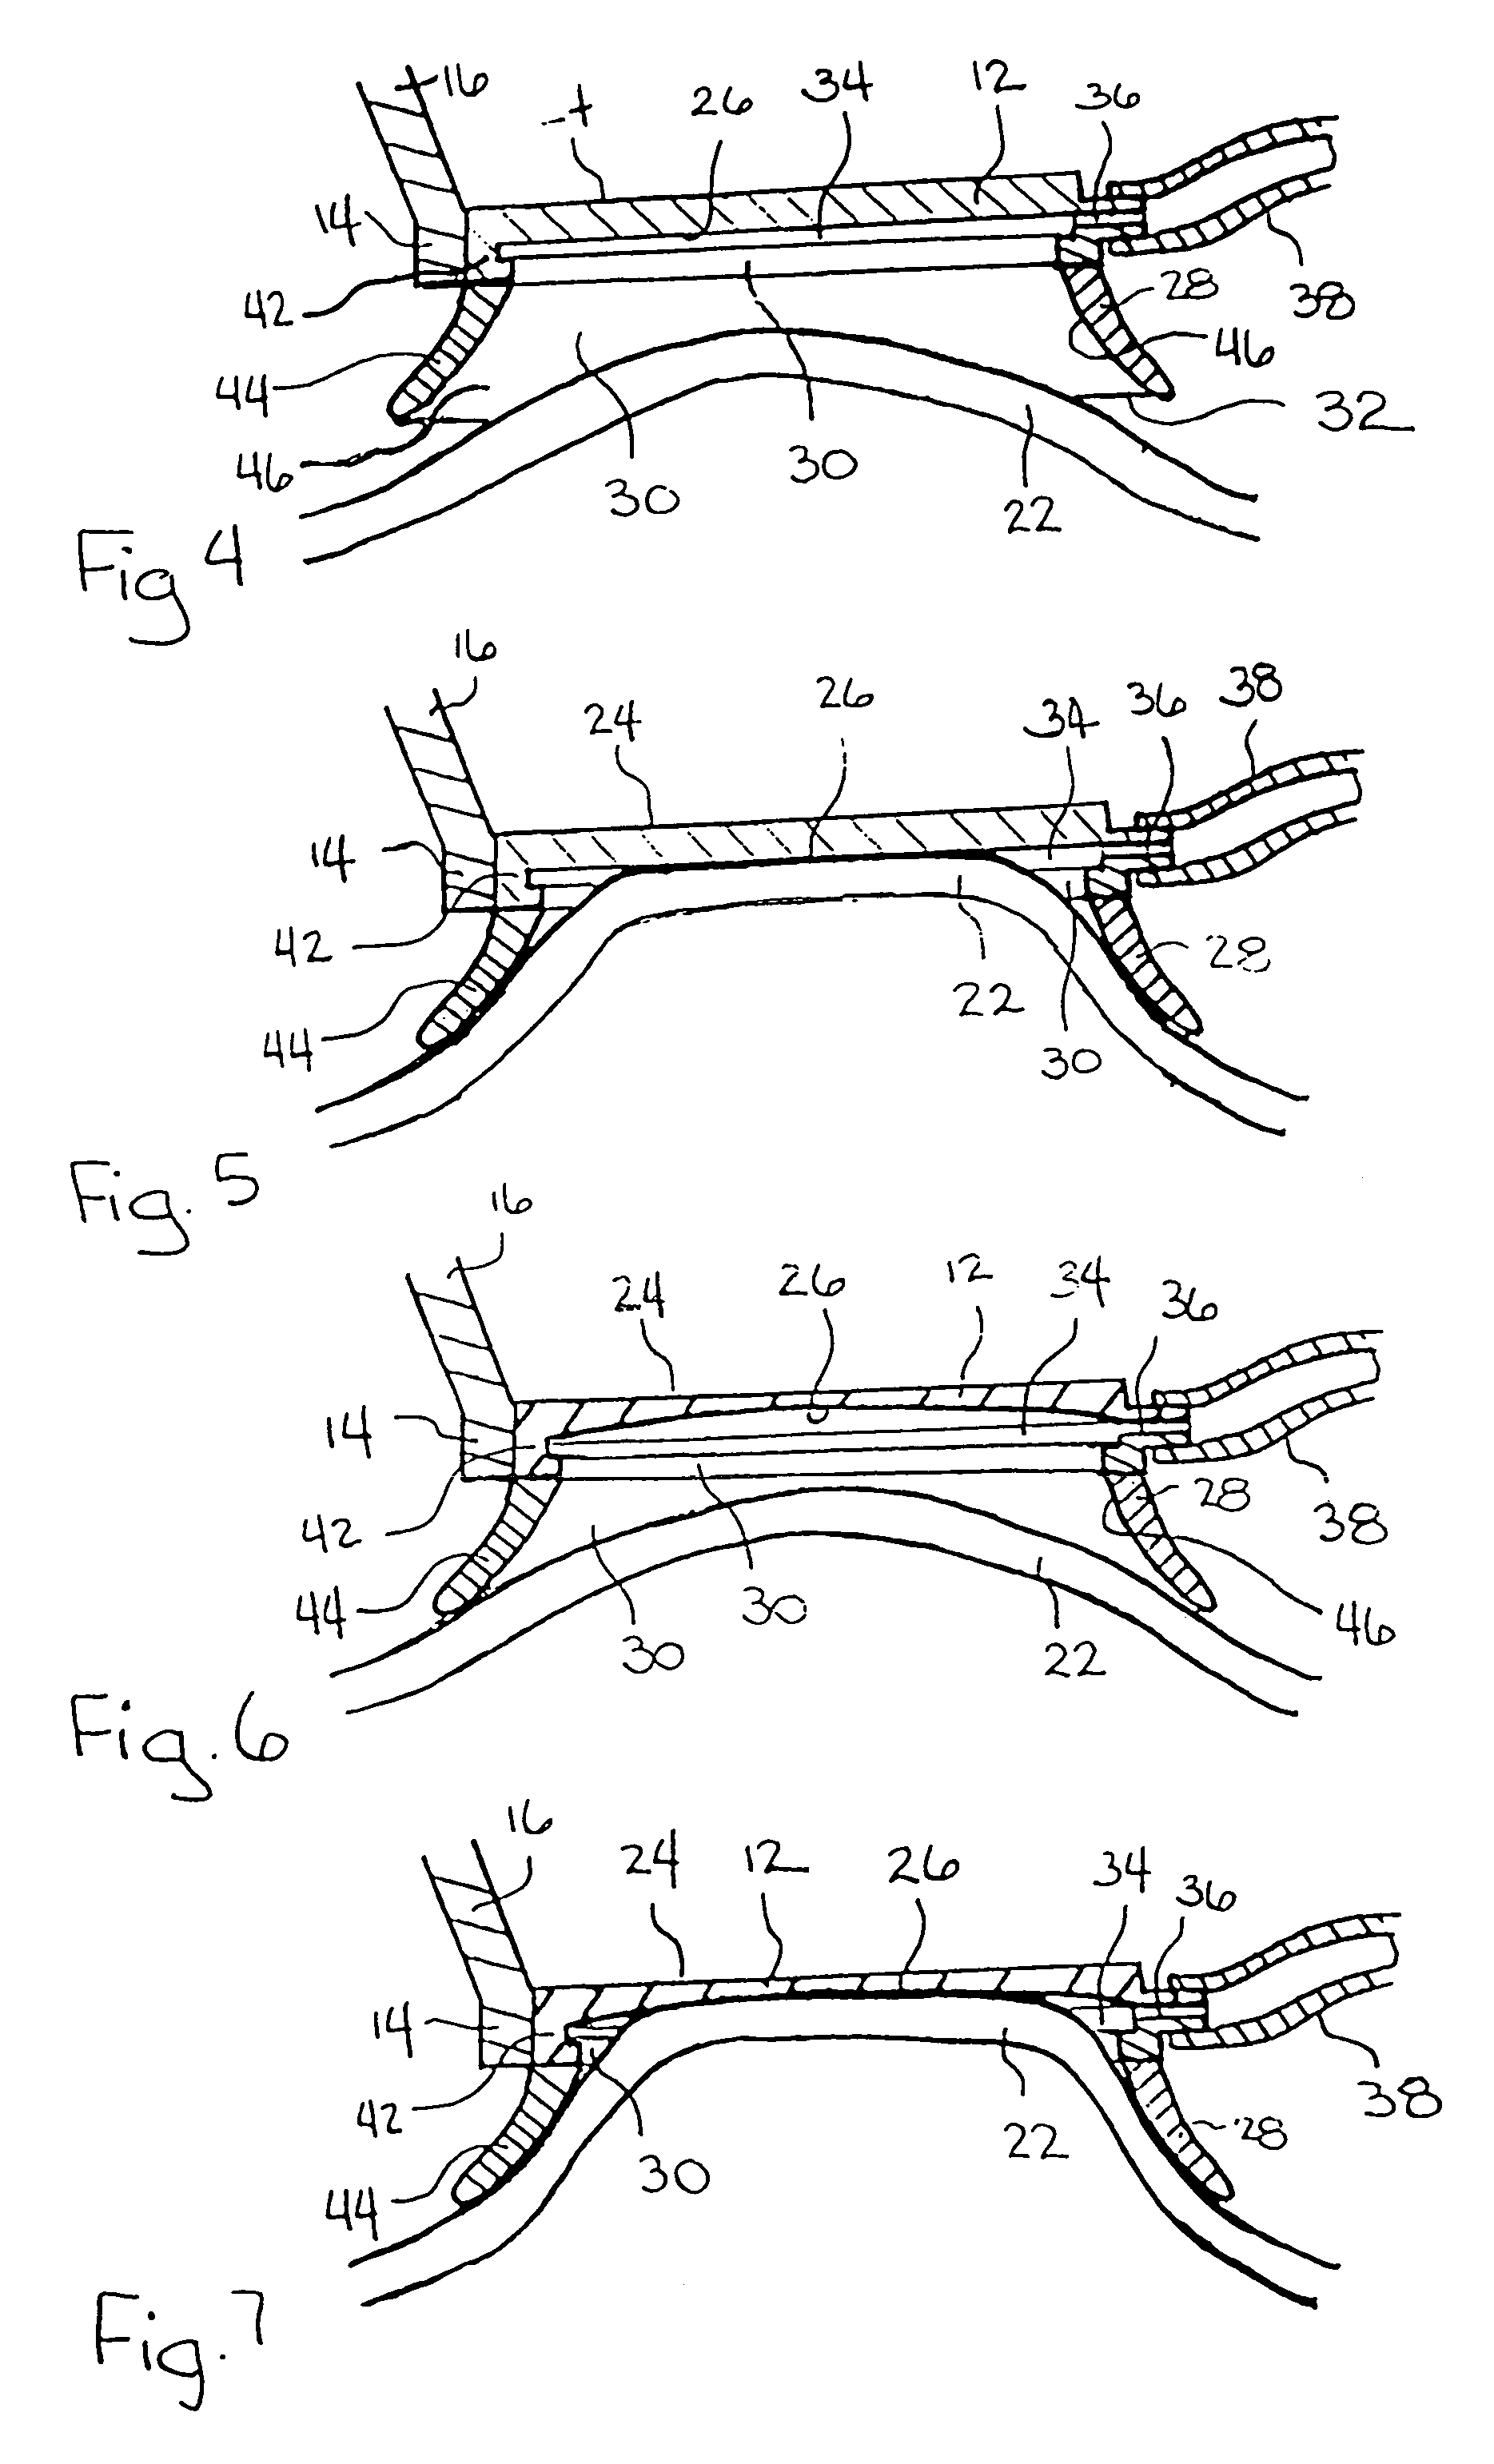 Device and method for reducing corneal induced aberrations during ophthalmic laser surgery